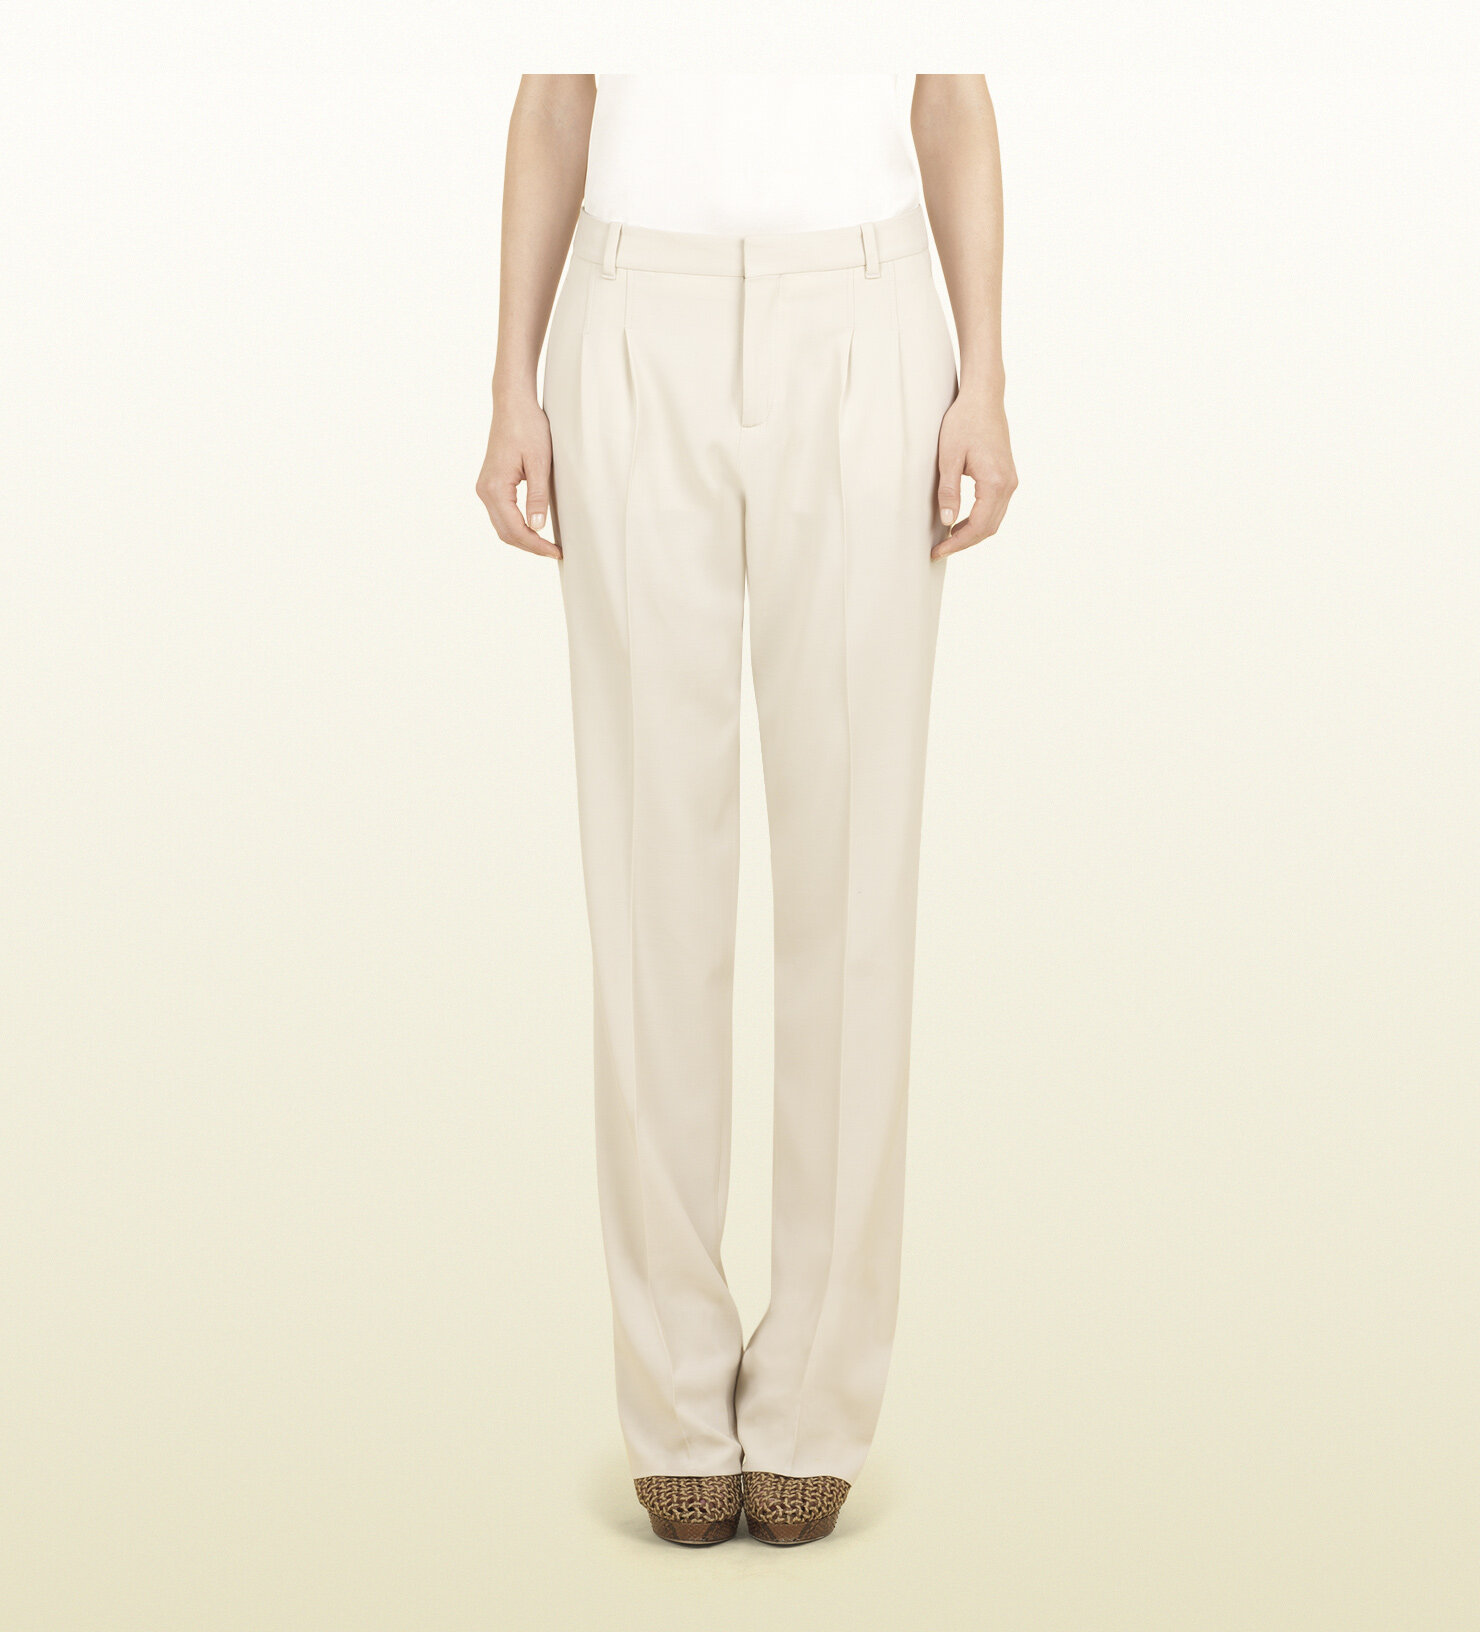 Gucci Clay Fine Tricotine Dart Pants in White.jpg